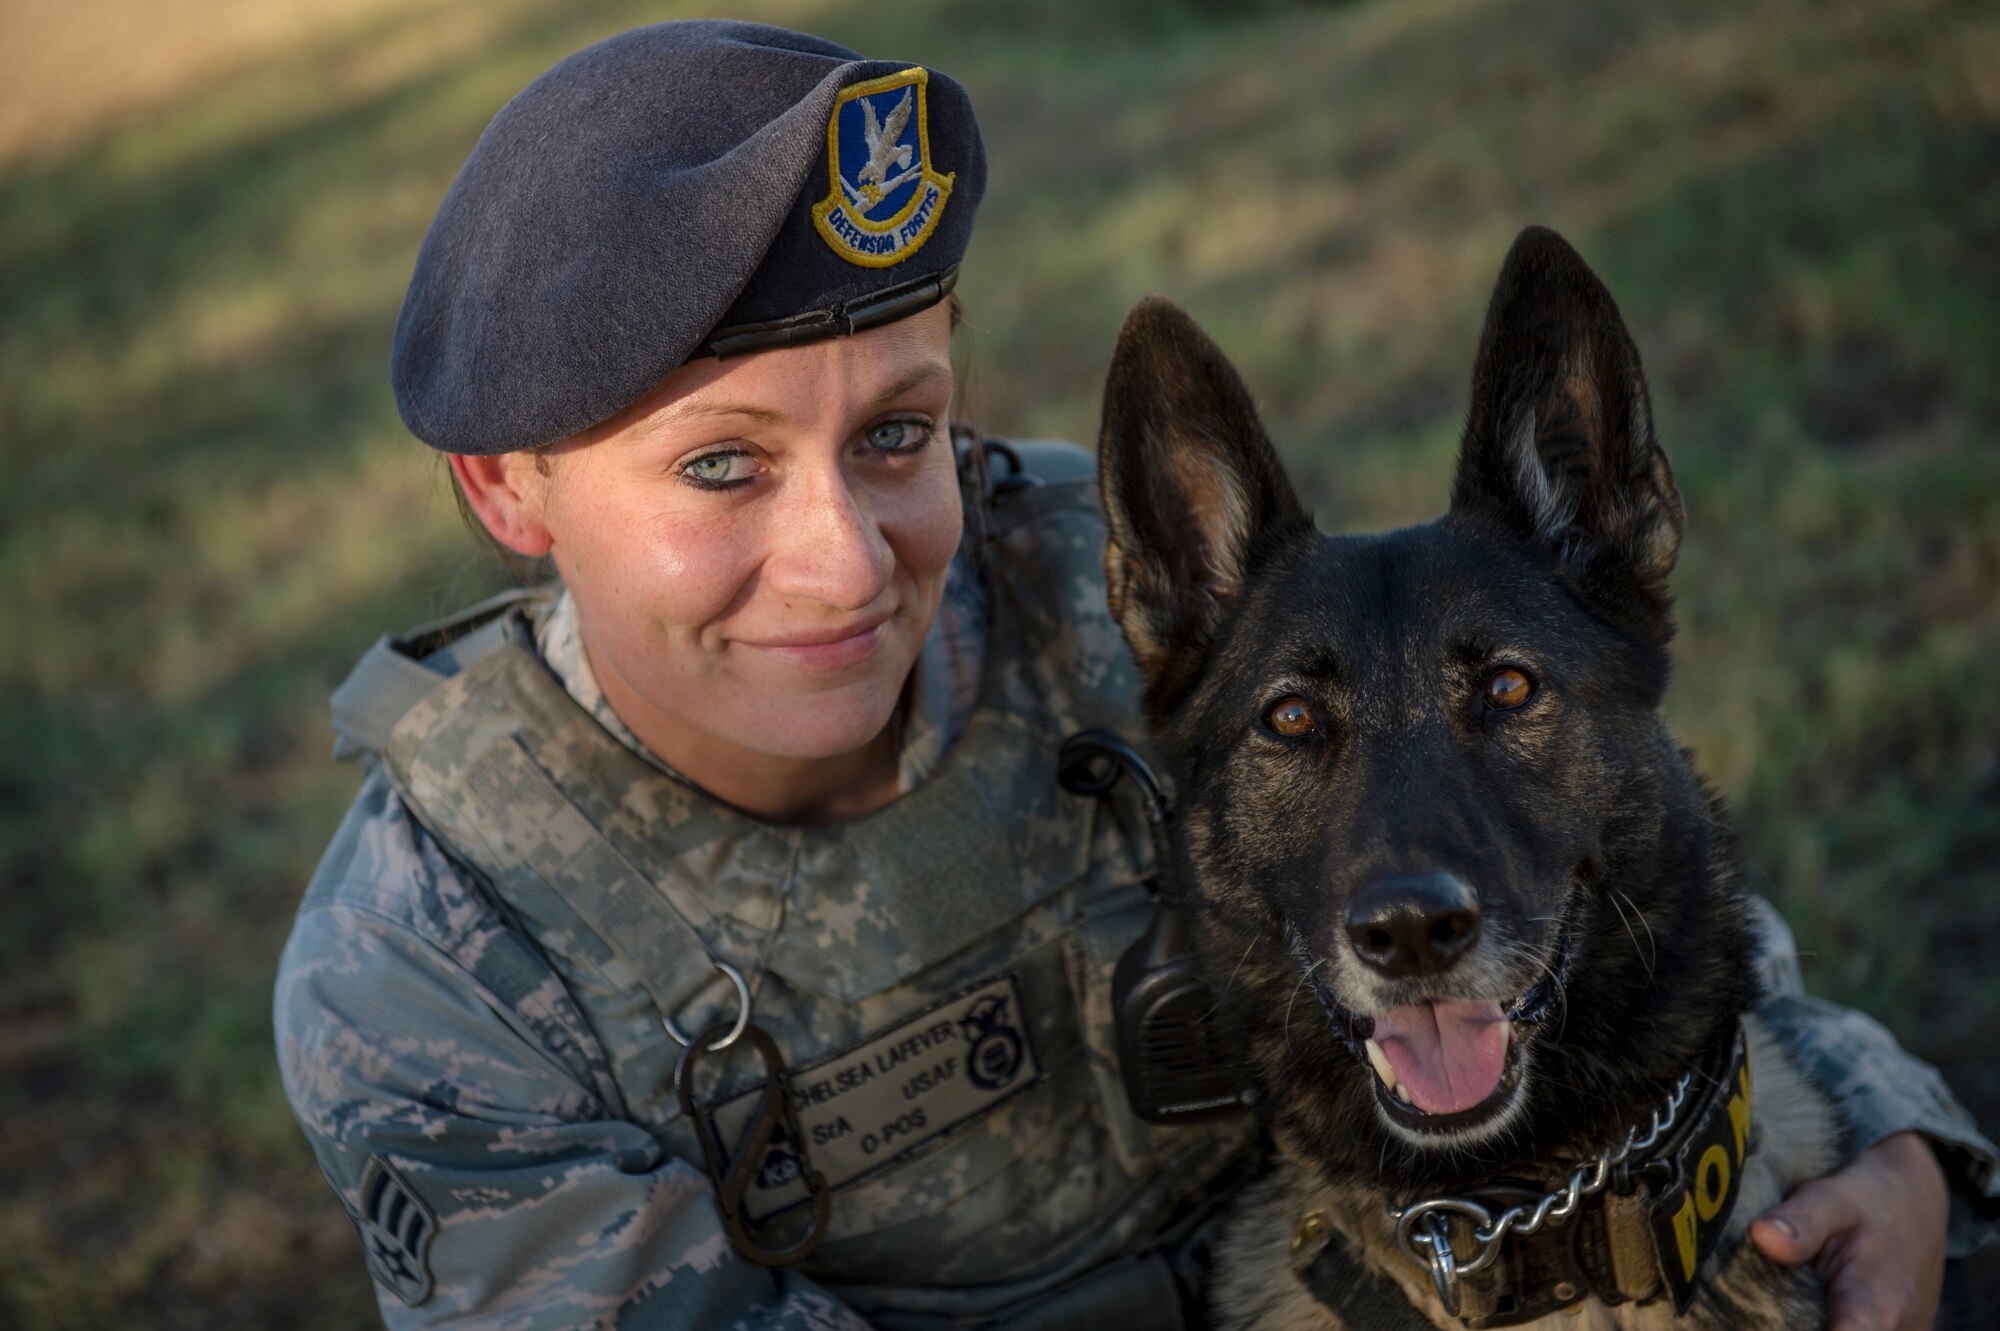 Senior Airman Chelsea LaFever, a military working dog handler from the 802nd Security Forces Squadron, smiles with her dog ZZusa after training at Joint Base San Antonio-Lackland. Upon completion of training tasks, LaFever encourages ZZusa with a treat. LaFever and ZZusa have been training and developing chemistry to complete the day-to-day mission at JBSA-Lackland. (U.S. Air force photo/Staff Sgt. Vernon Young Jr.)